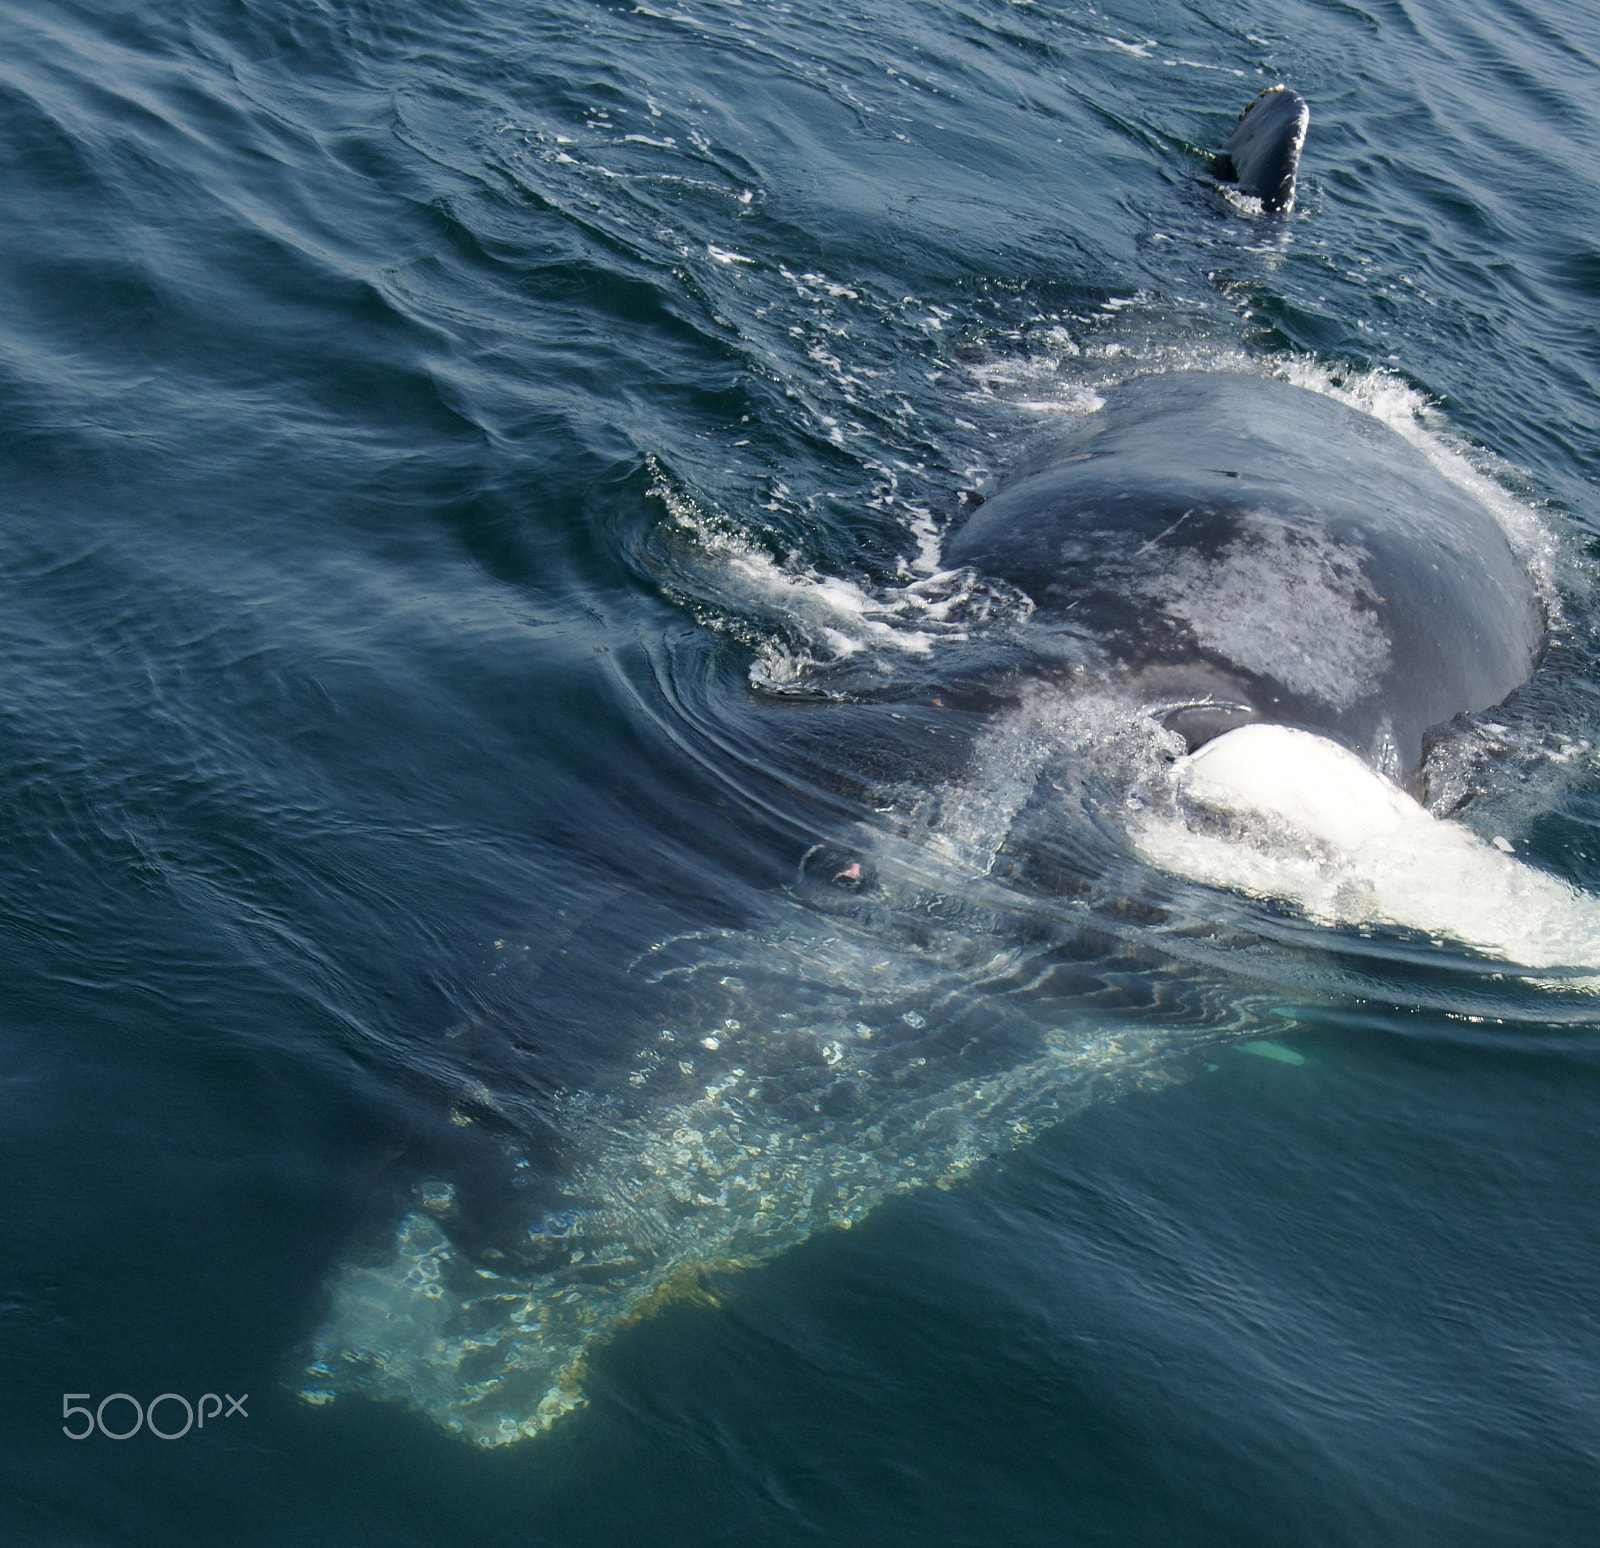 Tamron AF 18-250mm F3.5-6.3 Di II LD Aspherical (IF) Macro sample photo. Eye to eye with baby humpback whale photography